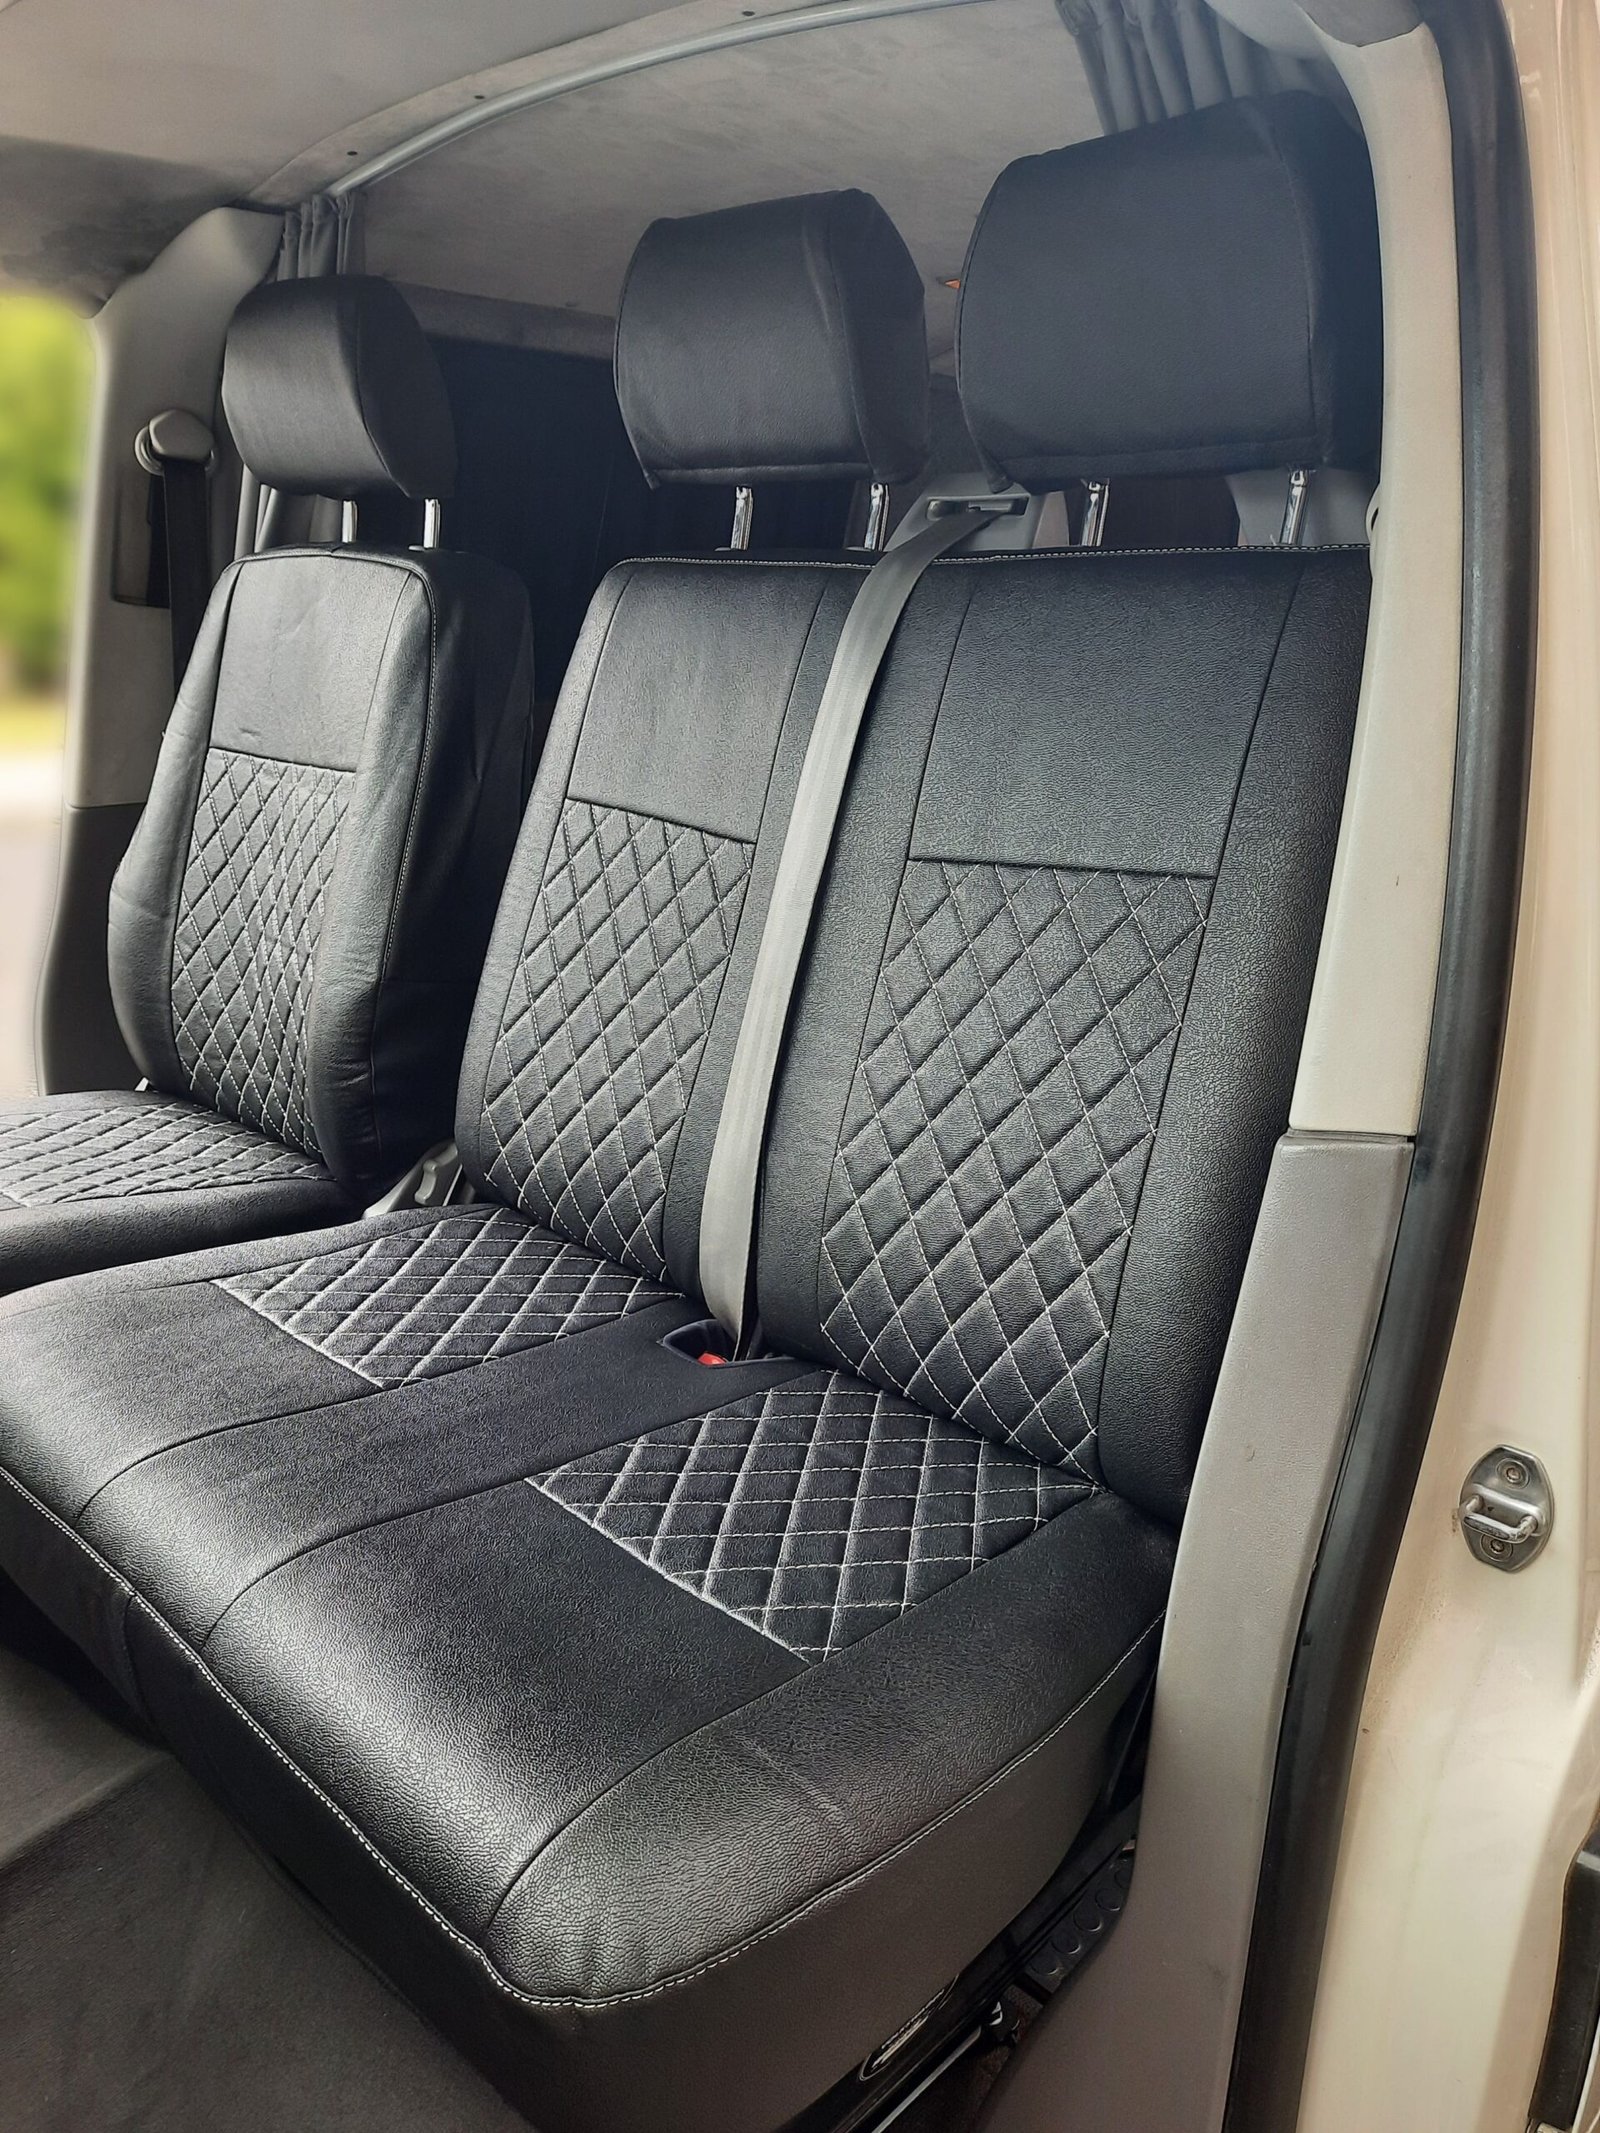 VW Transporter T6 seat covers - MilesOfSmilesSeatCovers